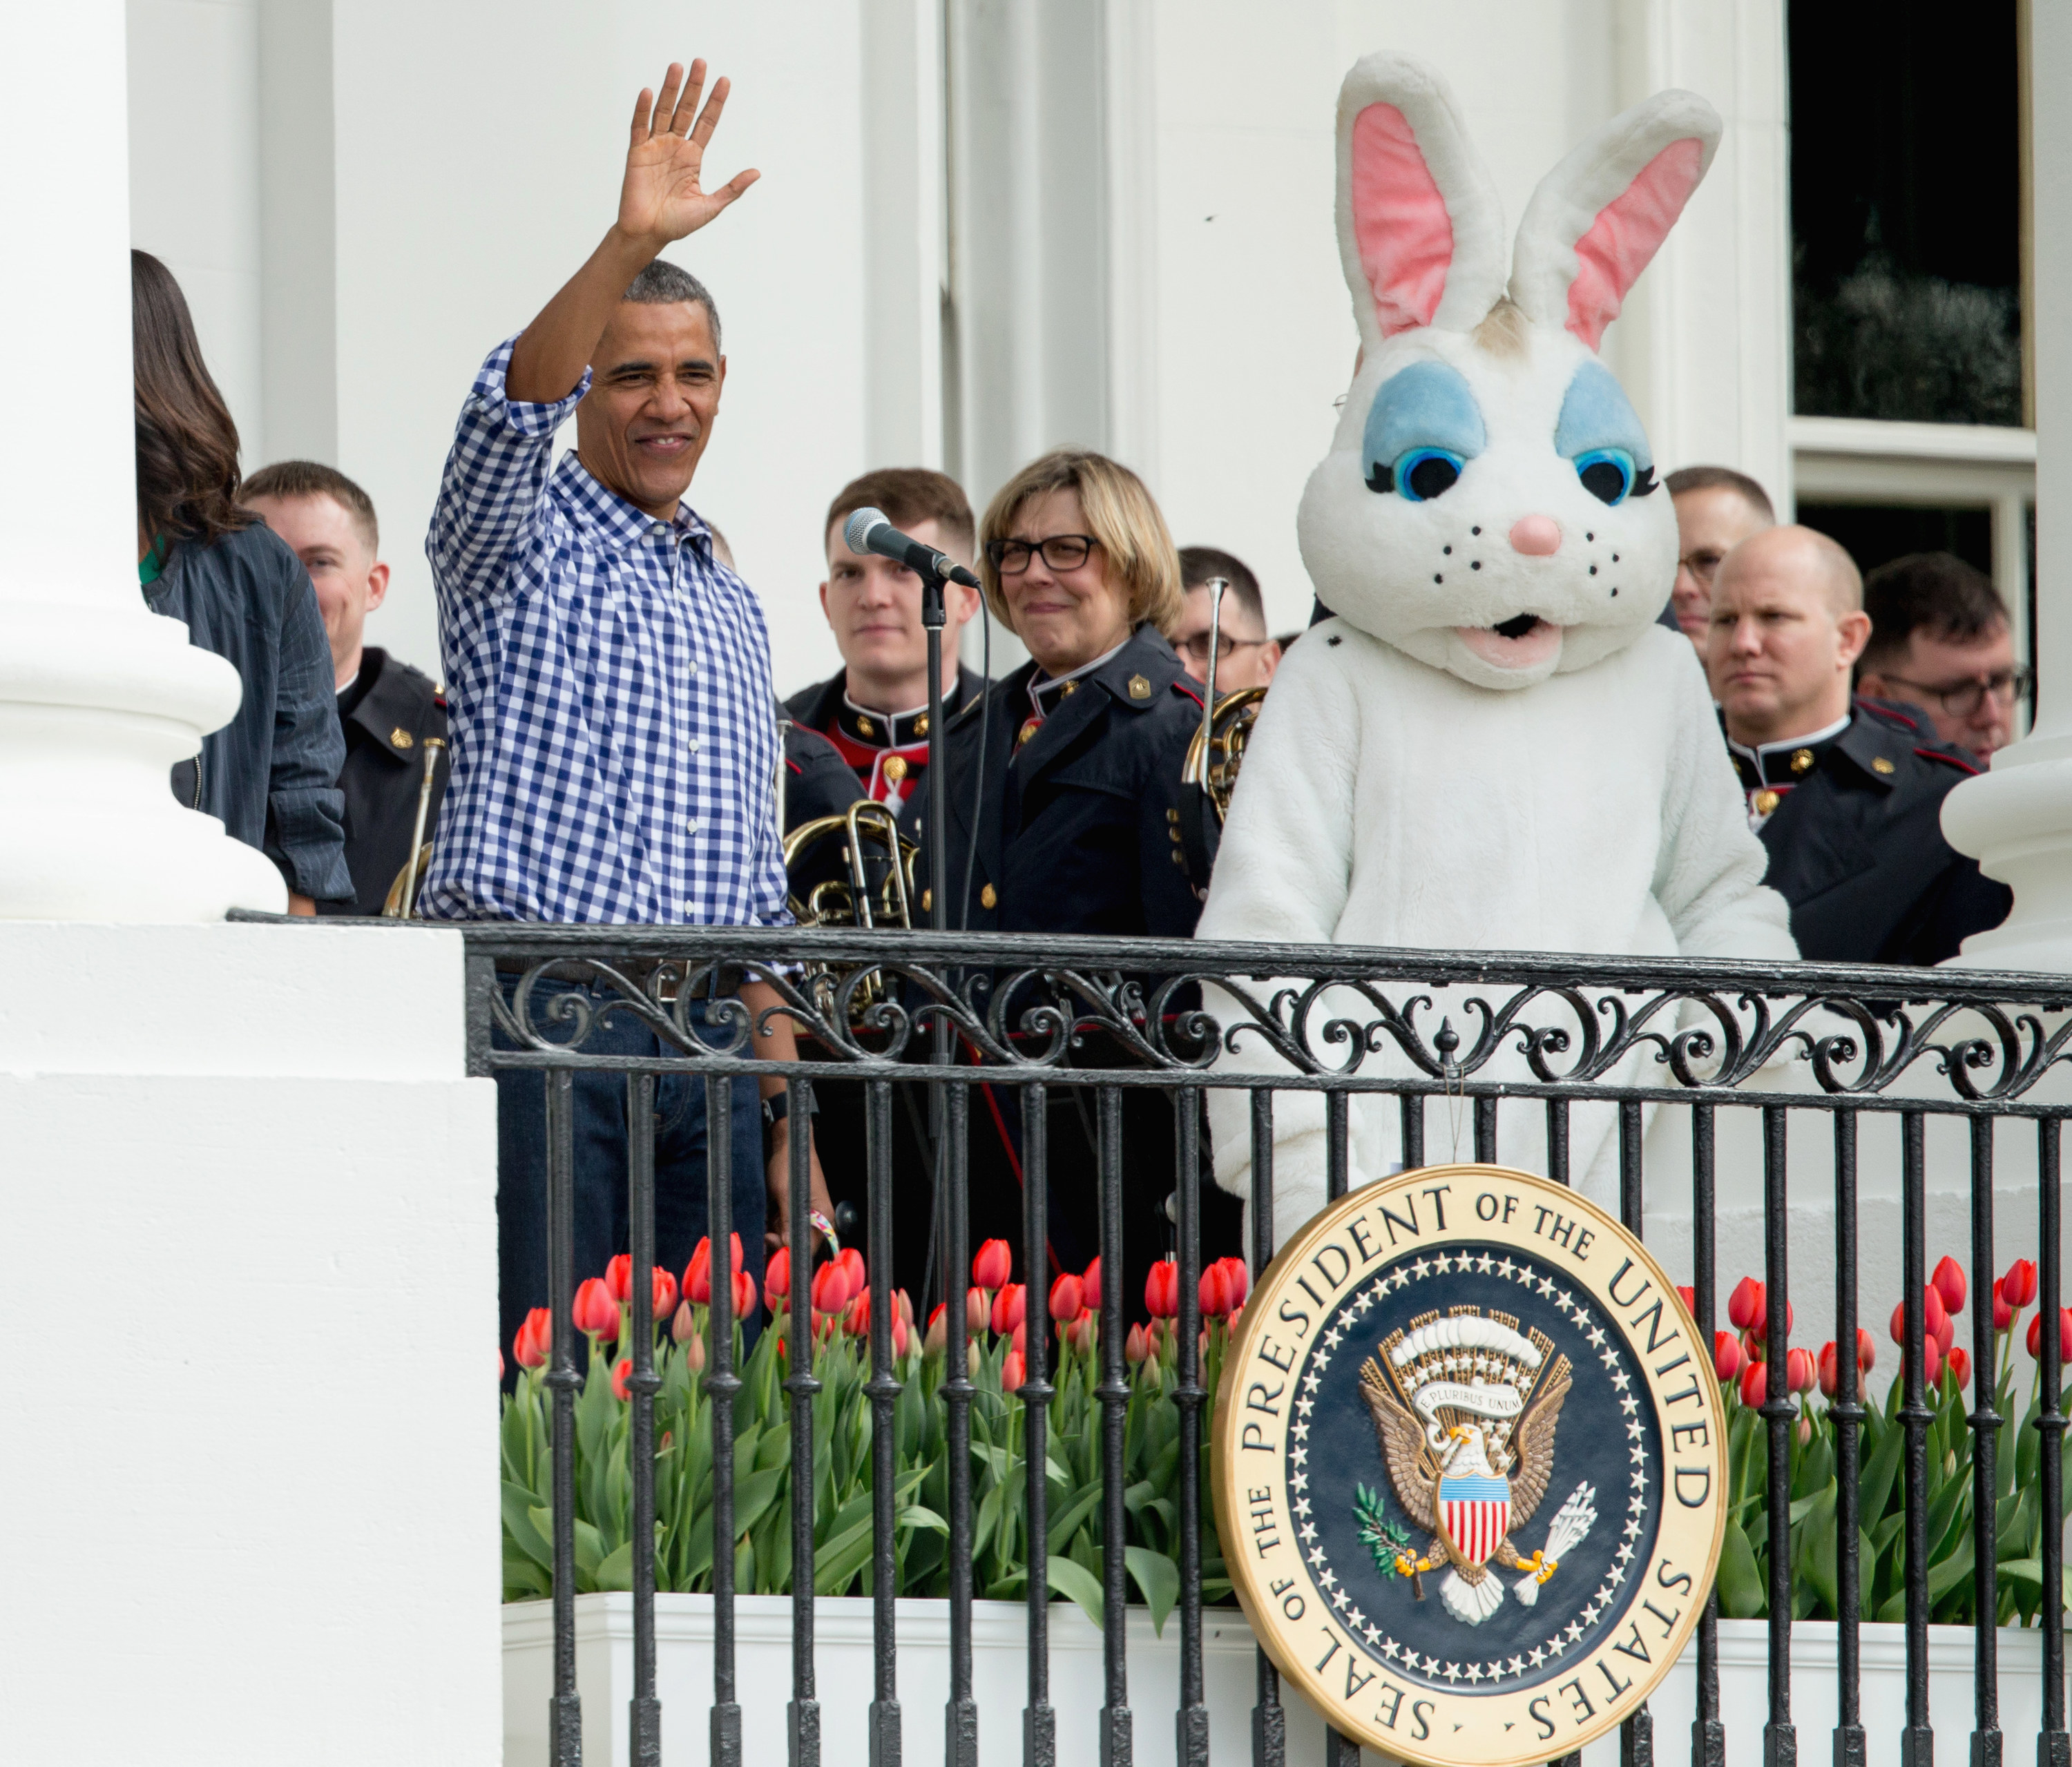 Obama is seen on a White House balcony next to ABBA Bunny